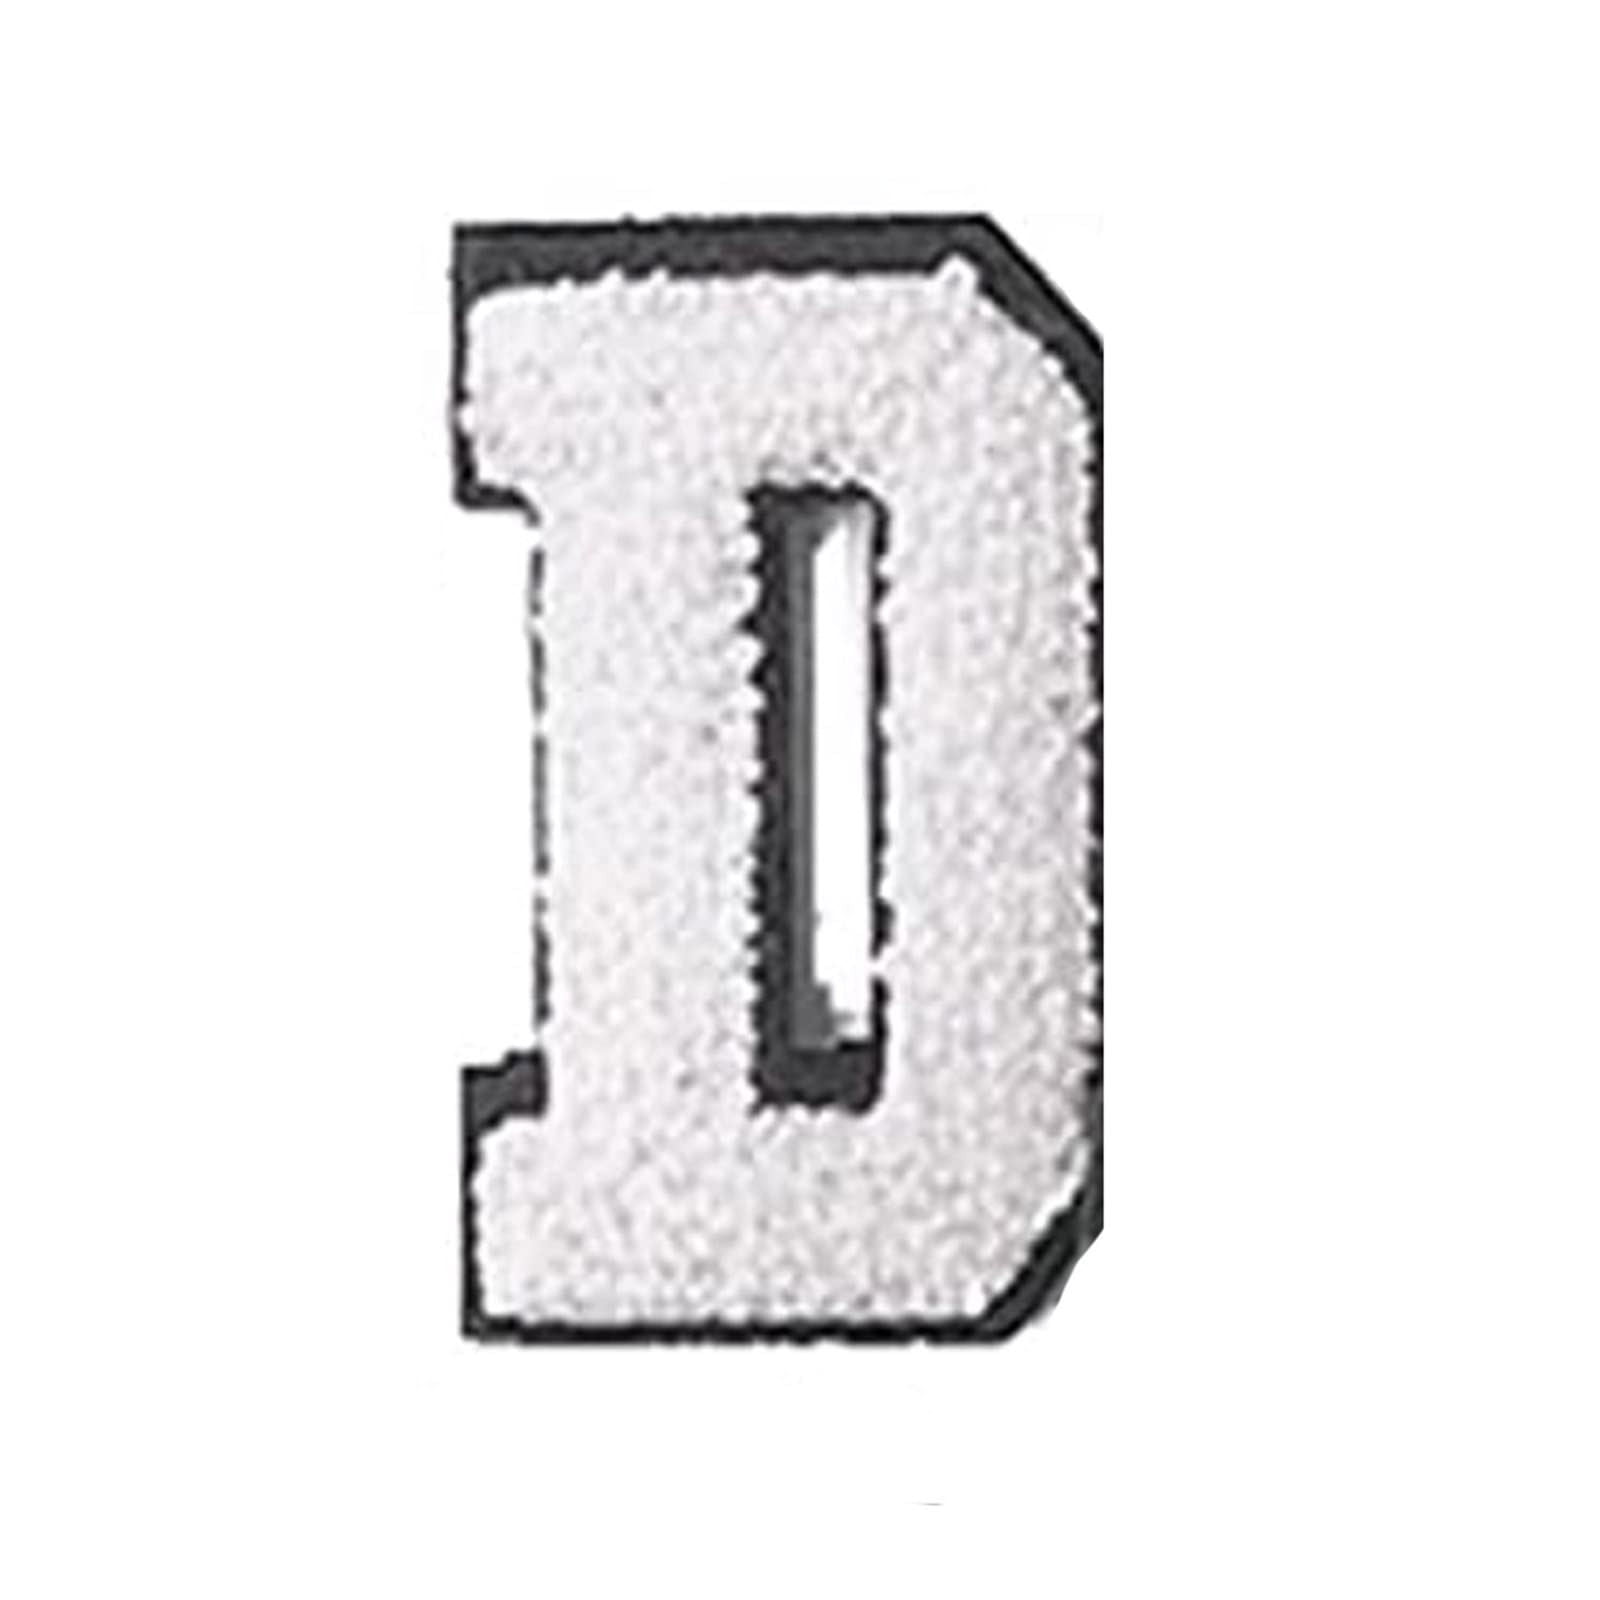 1PC 5.5cm Embroidered Letter Iron on Patch A-Z Chenille Letter Patches with  Glitter Varsity Fuzzy